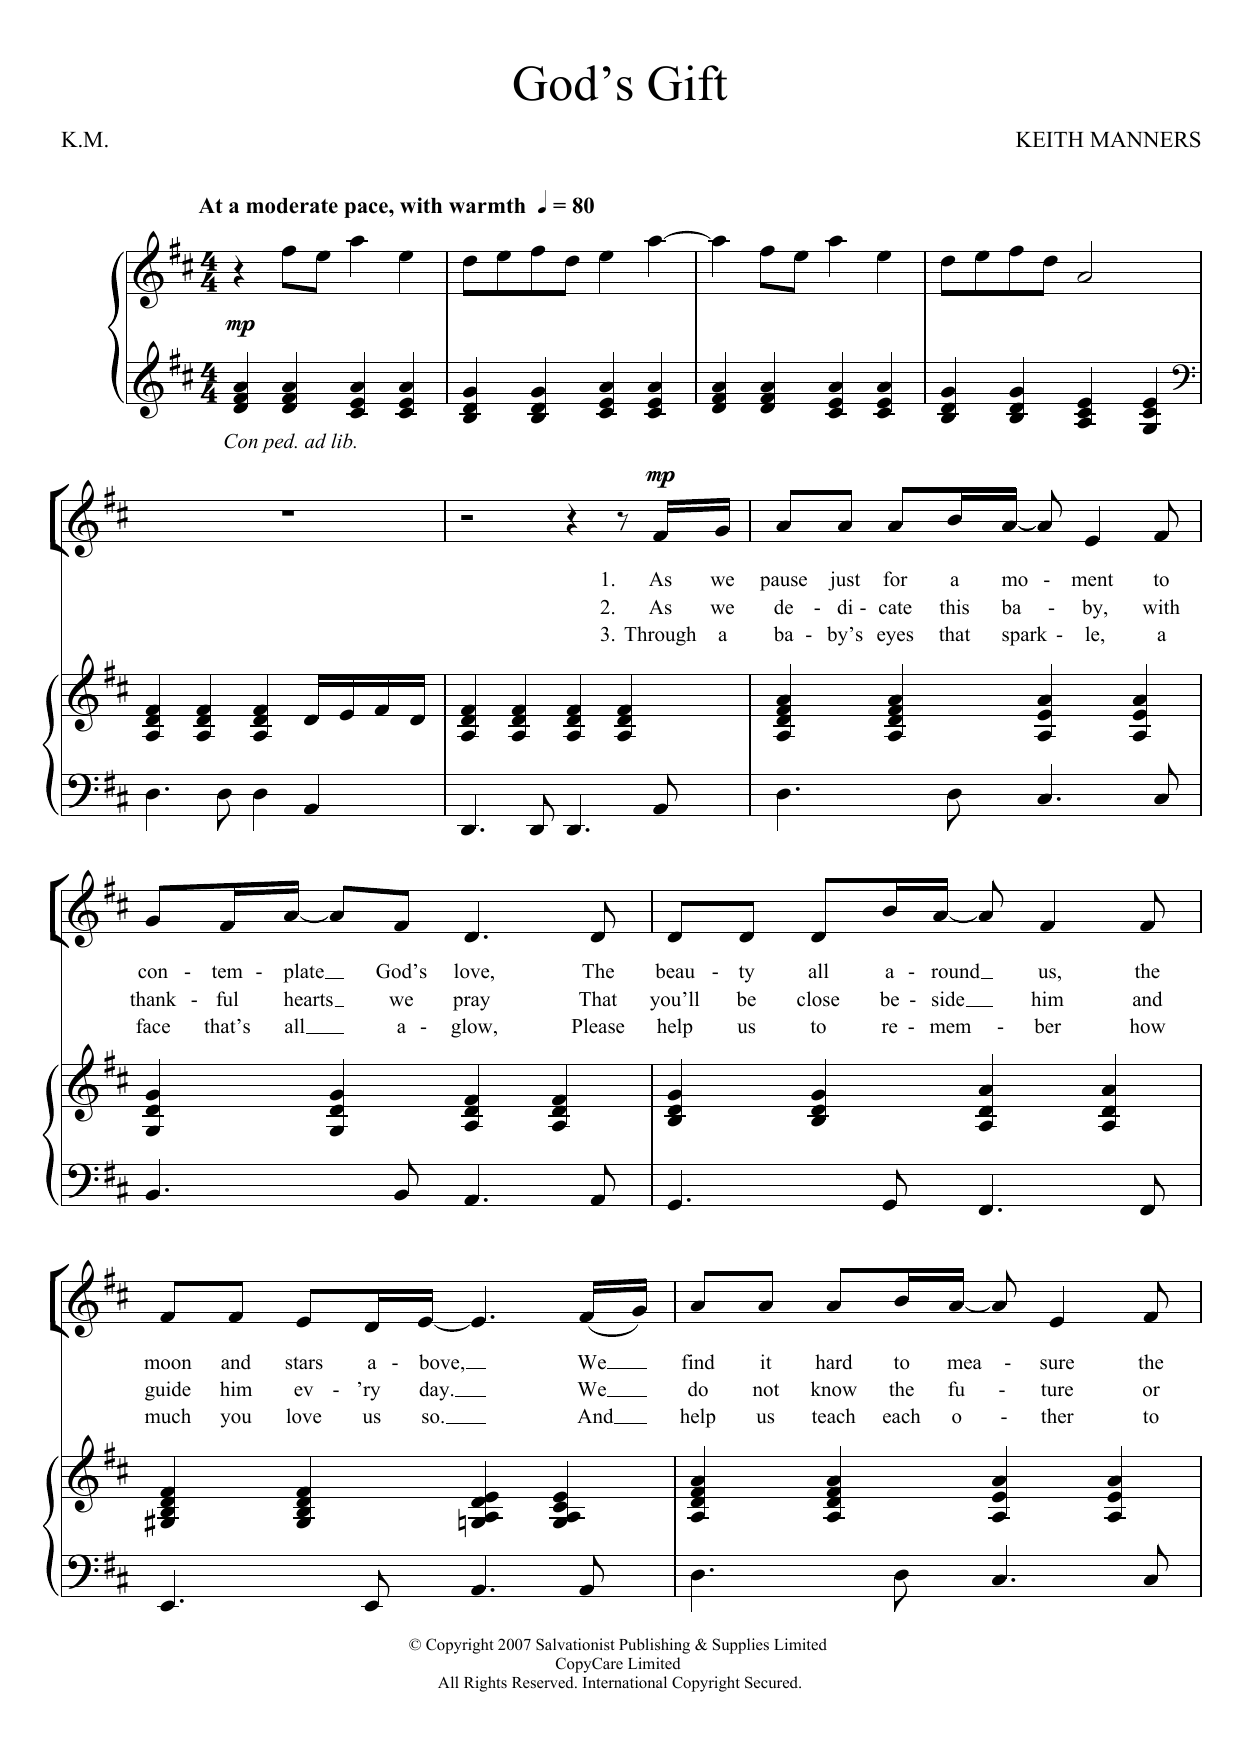 Download The Salvation Army God's Gift Sheet Music